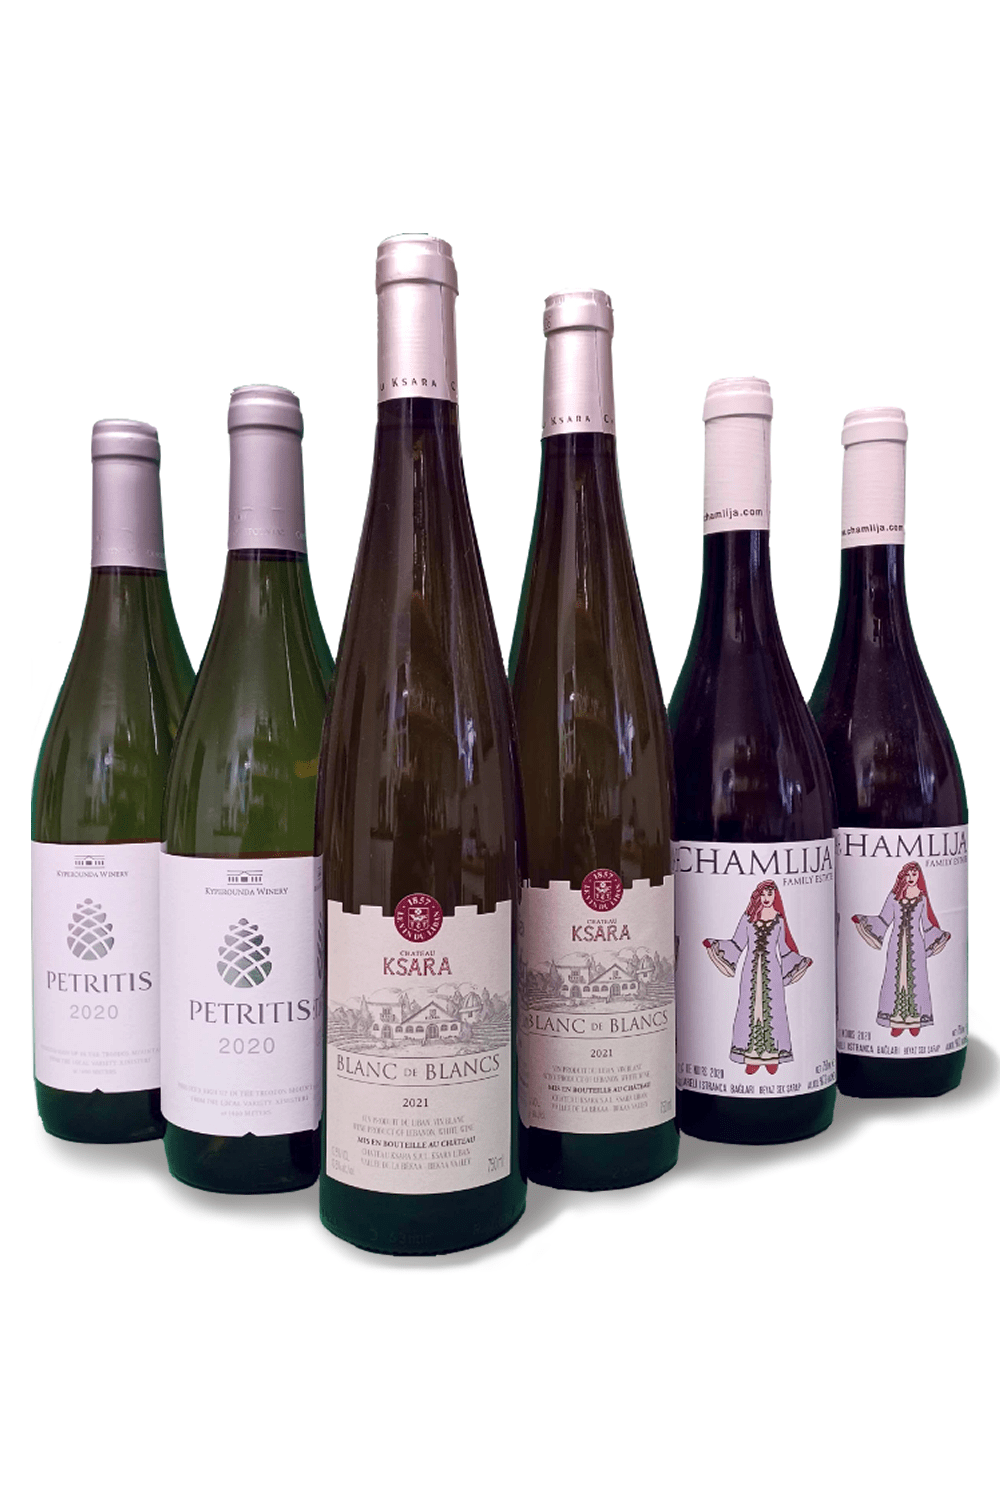 Novel Wines Mixed Case Our Deal On Eastern Med Whites - Six Bottle Mixed Case Offer